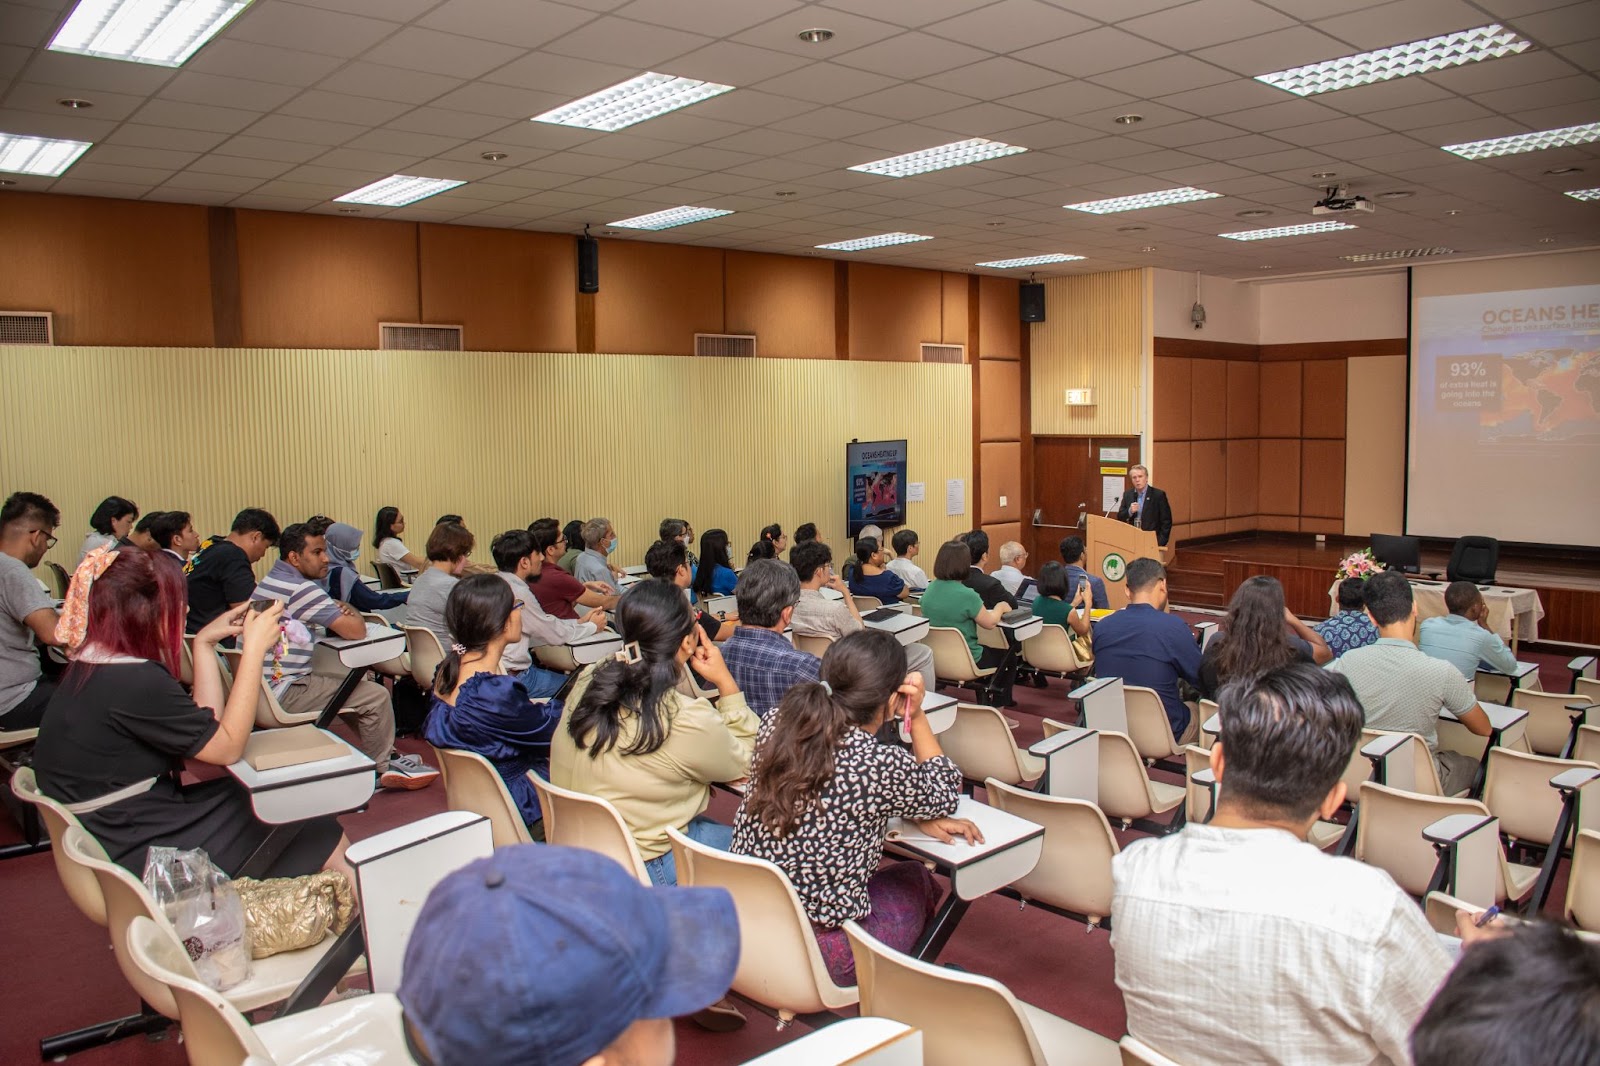 Seminar hall with participants and Prof. McLean